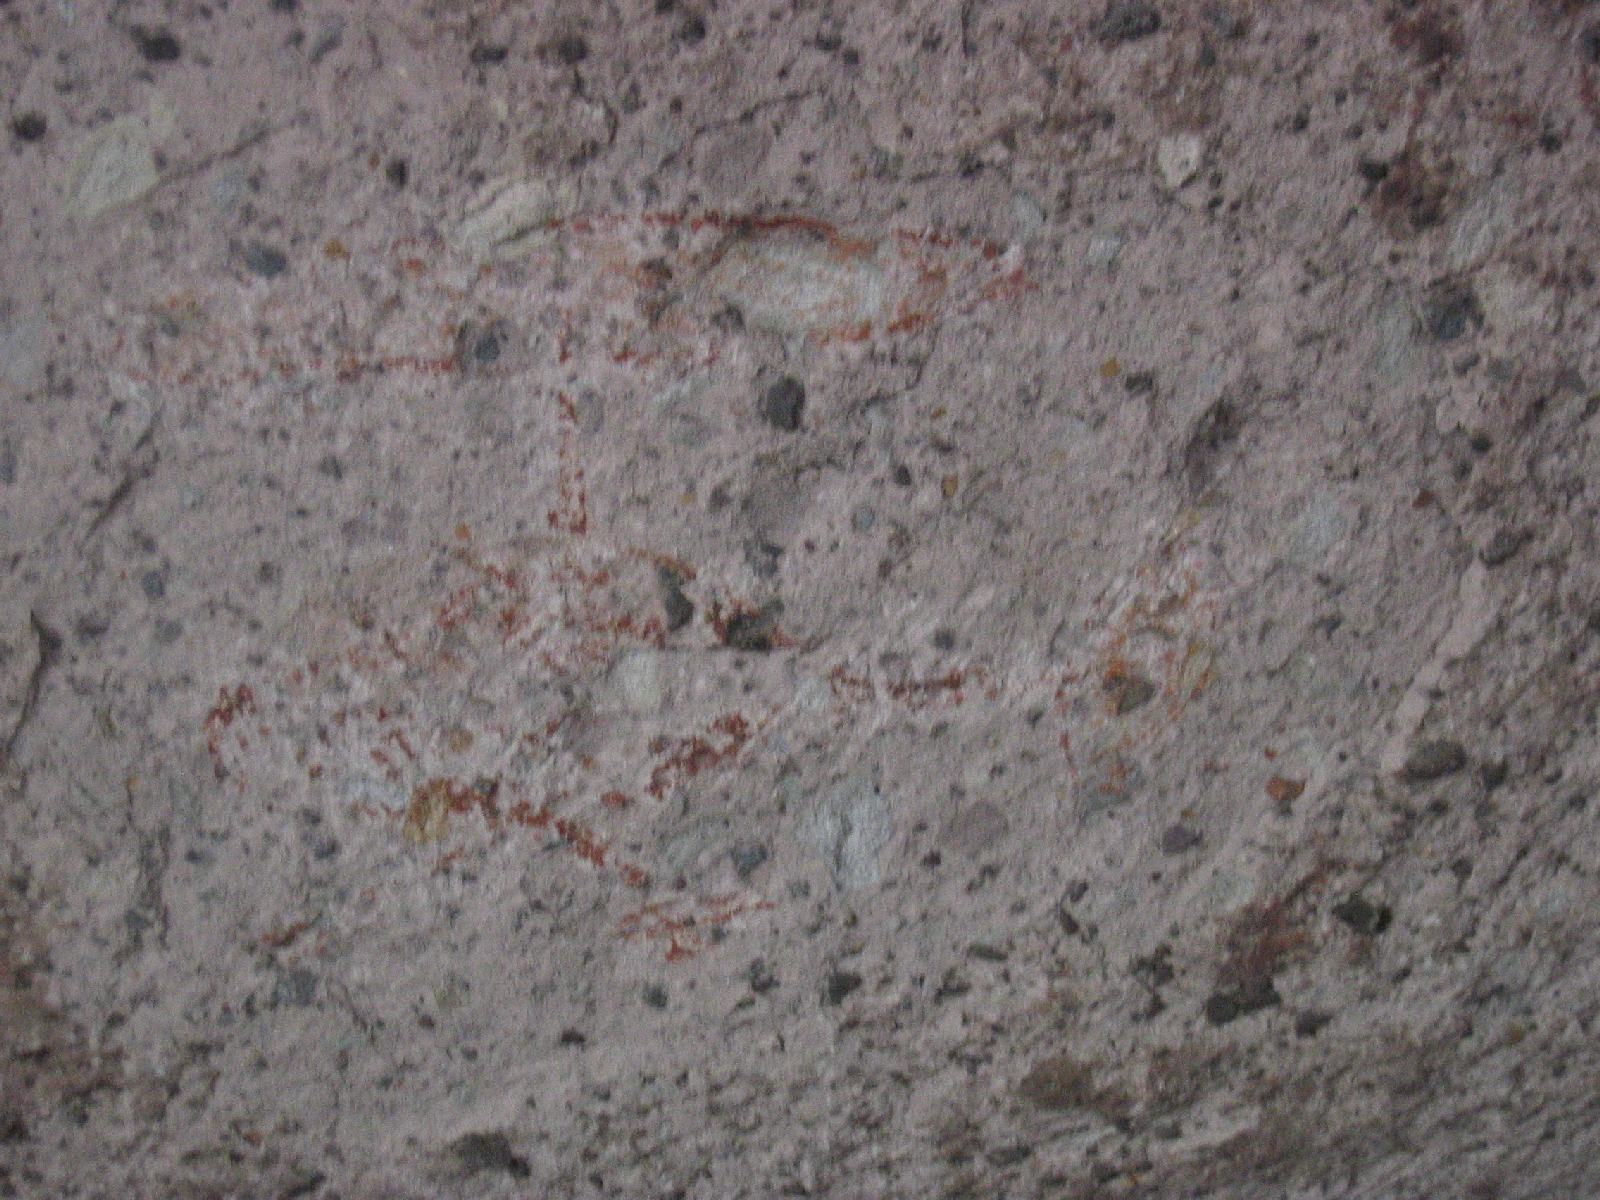 Salvador pointed out this unfortunate graffitti at the back of the cave. Hard to make out because someone has tried to remove it.